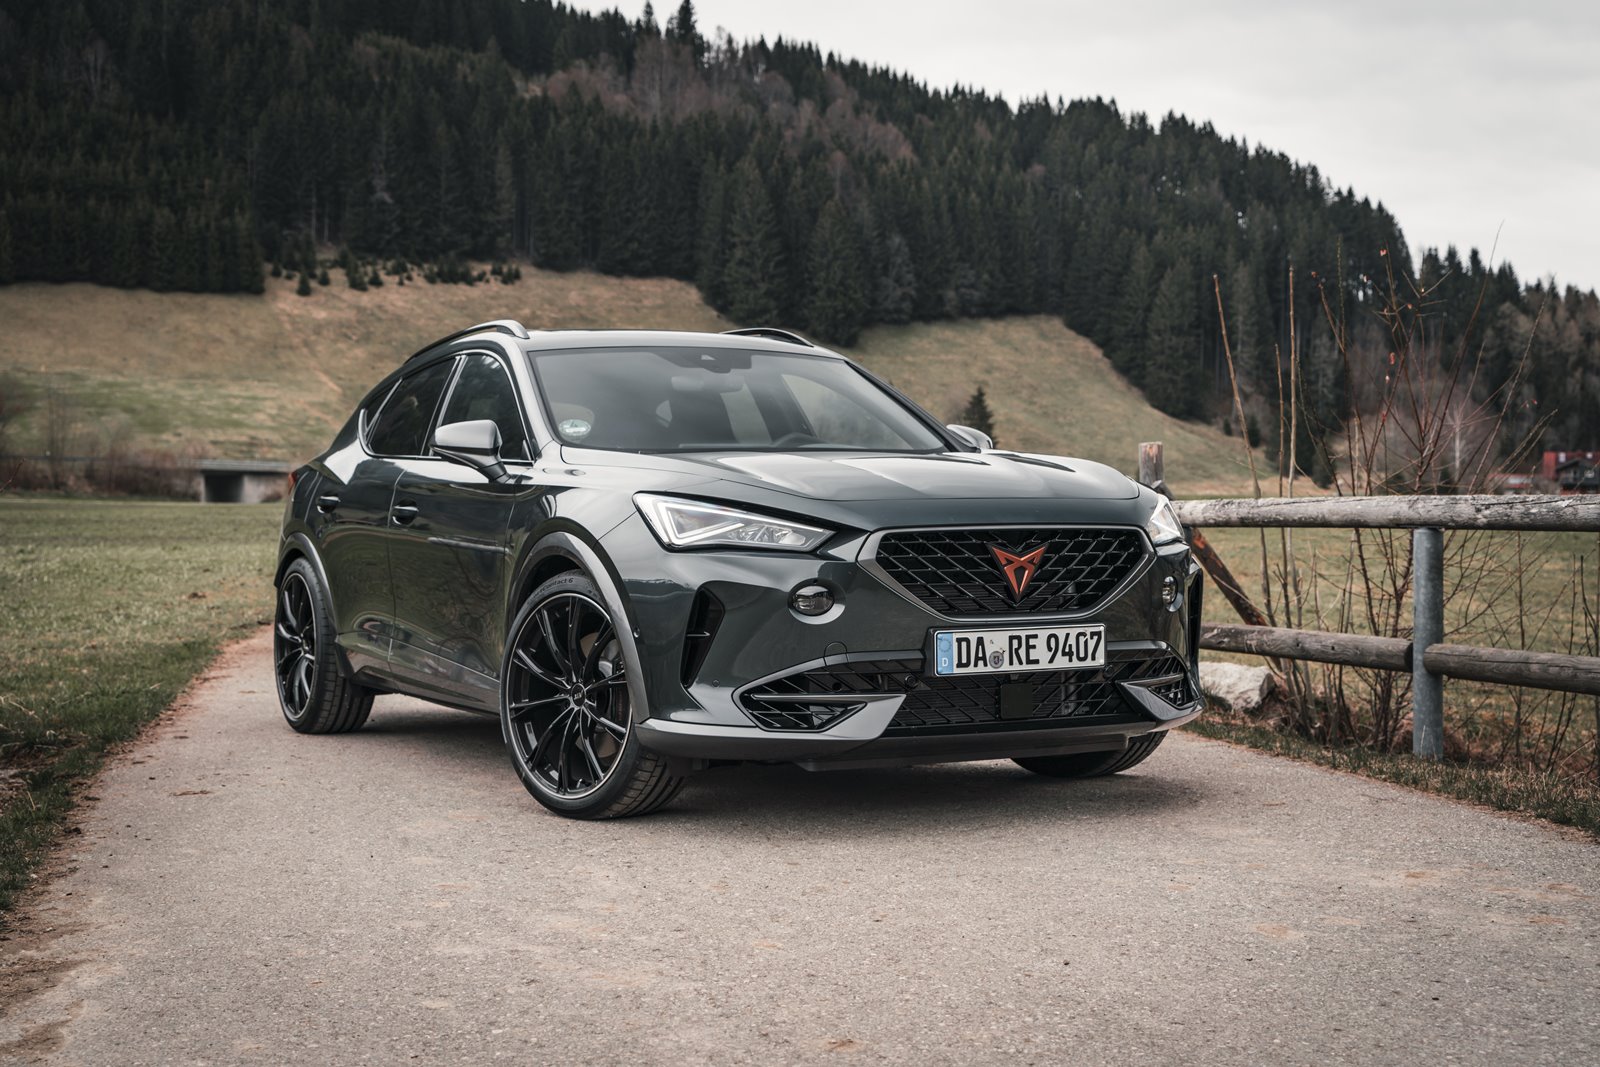 The Cupra Tavascan will be made in China in 2024